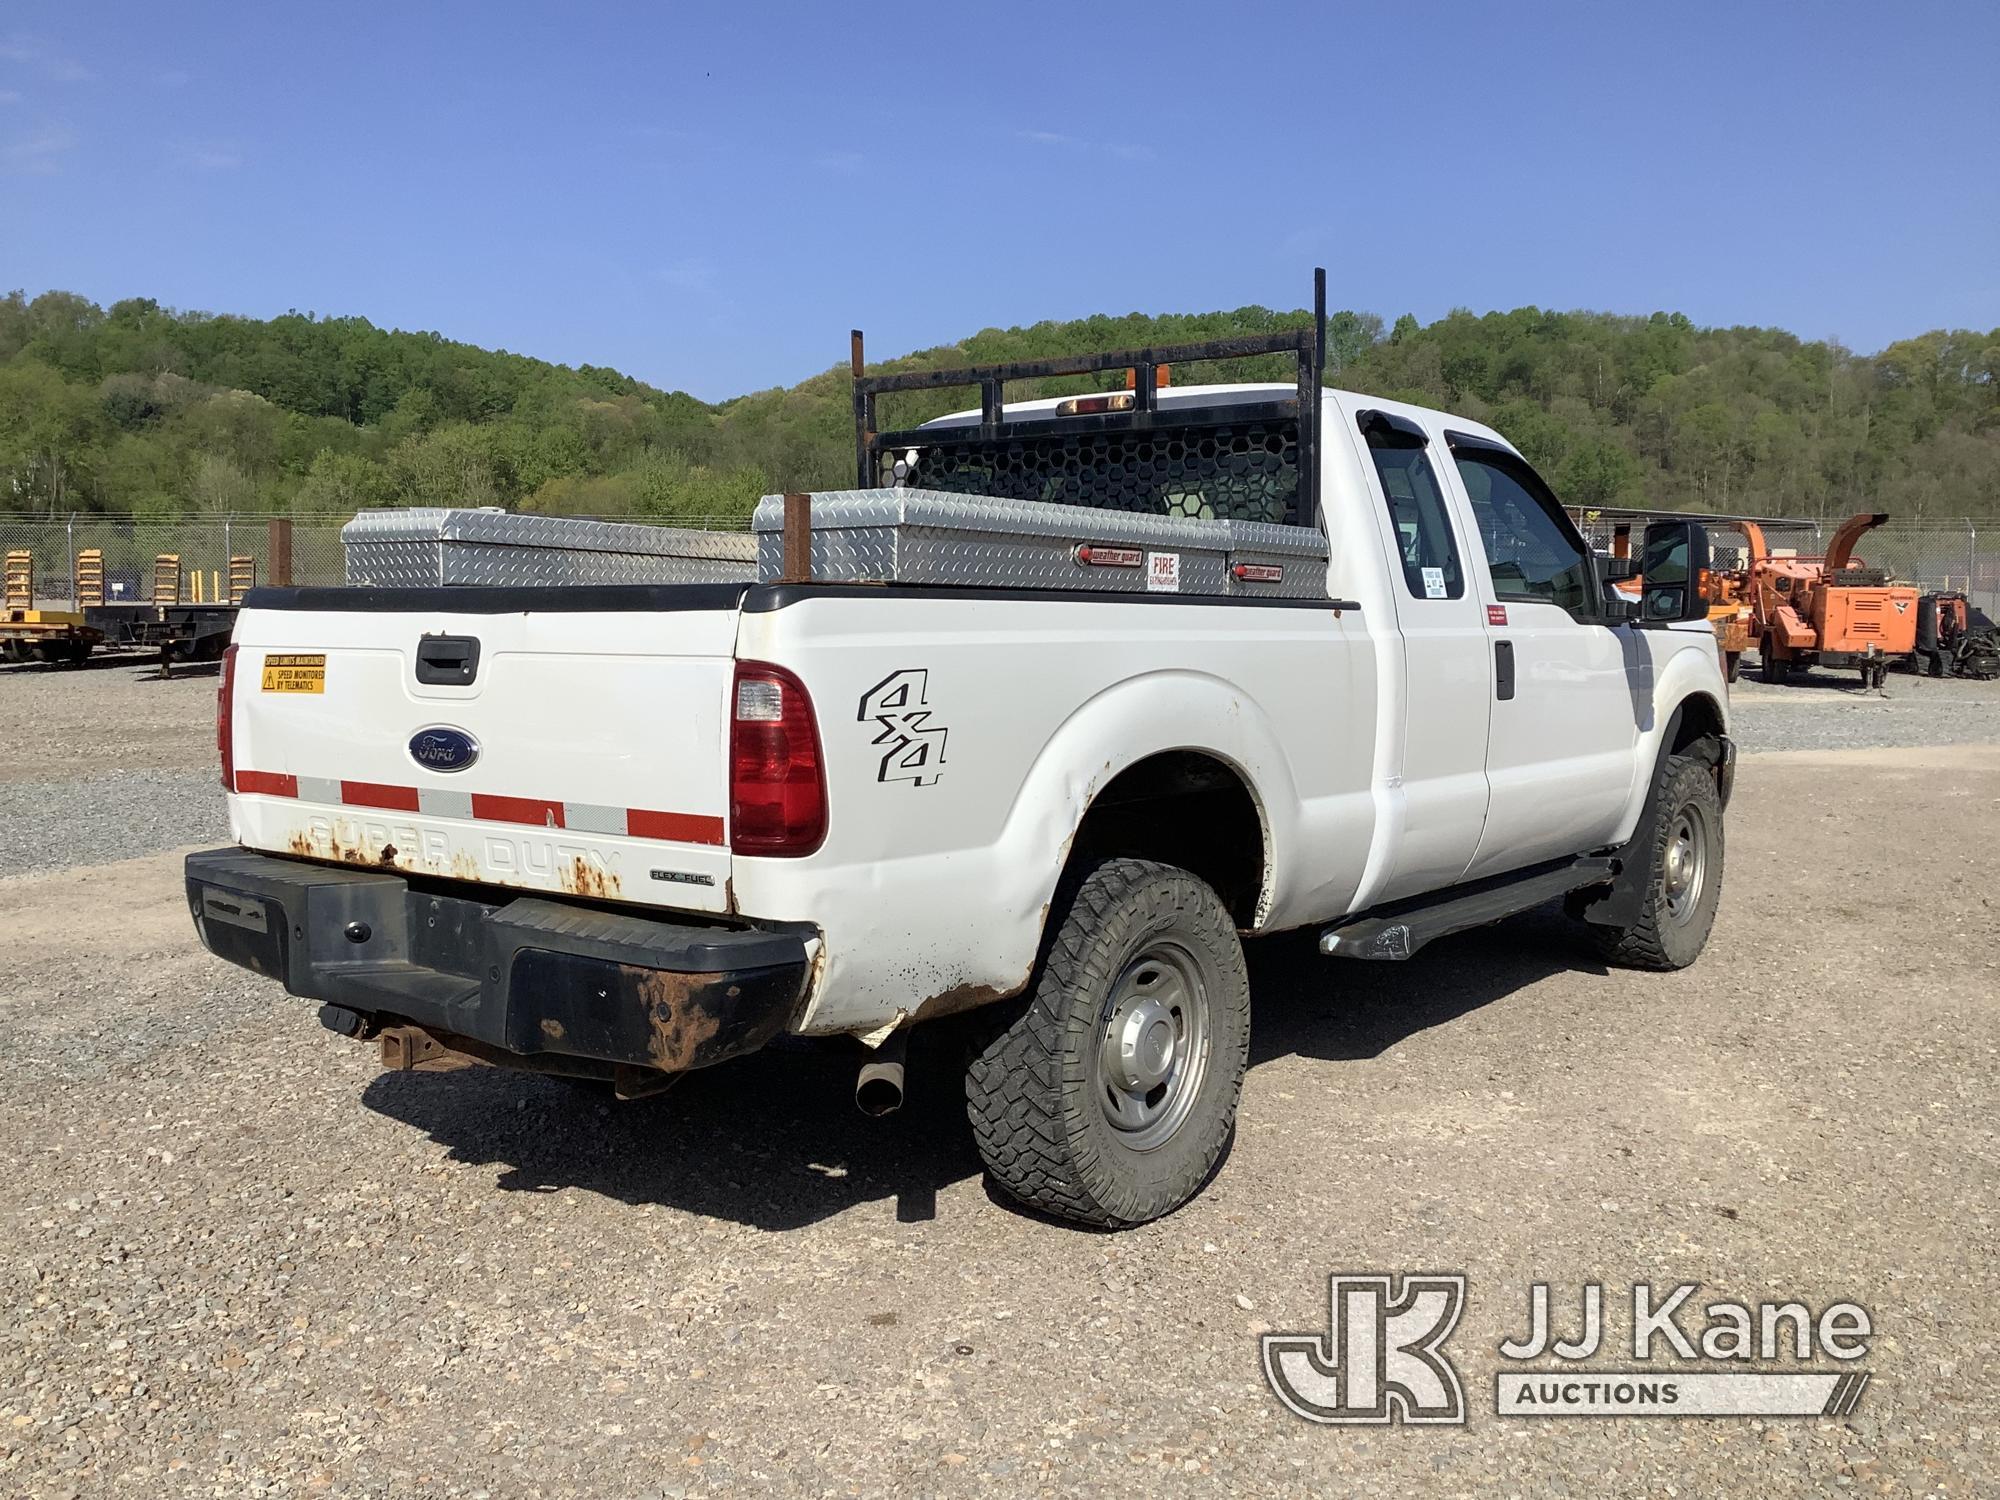 (Smock, PA) 2015 Ford F250 4x4 Extended-Cab Pickup Truck Runs & Moves, Jump To Start, Disconnected T